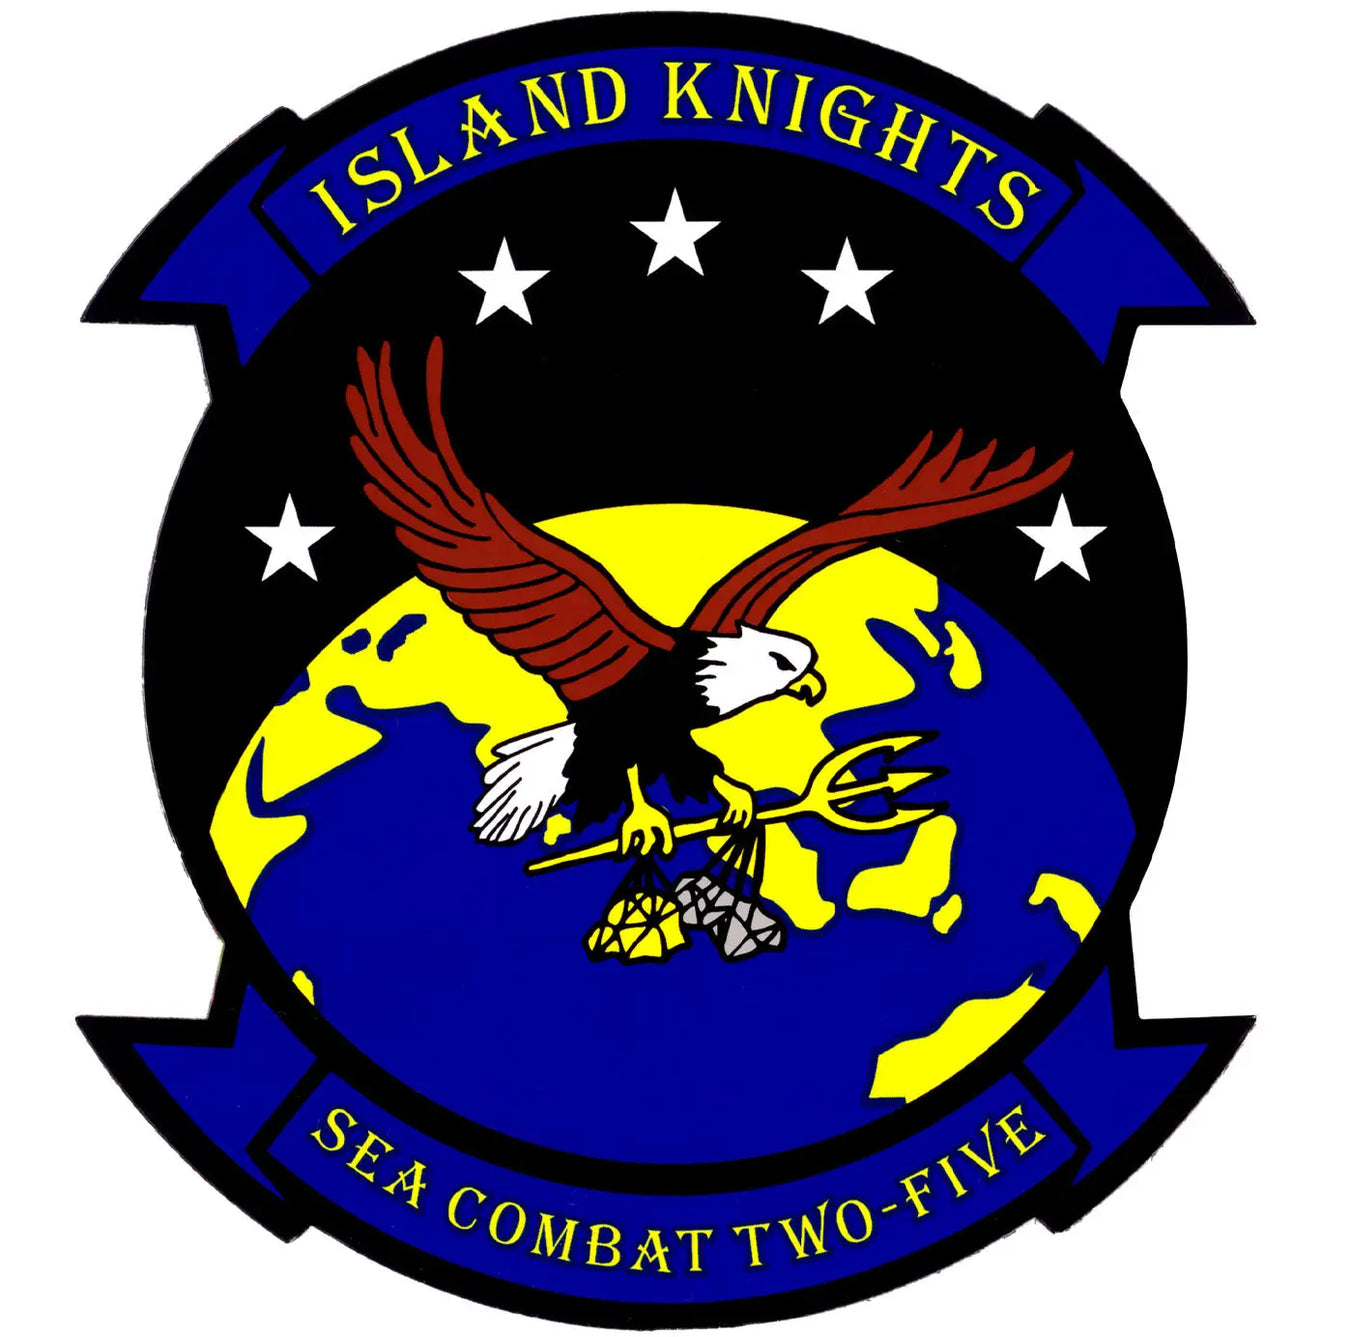 Helicopter Sea Combat Squadron 25 (HSC-25) Island Knights